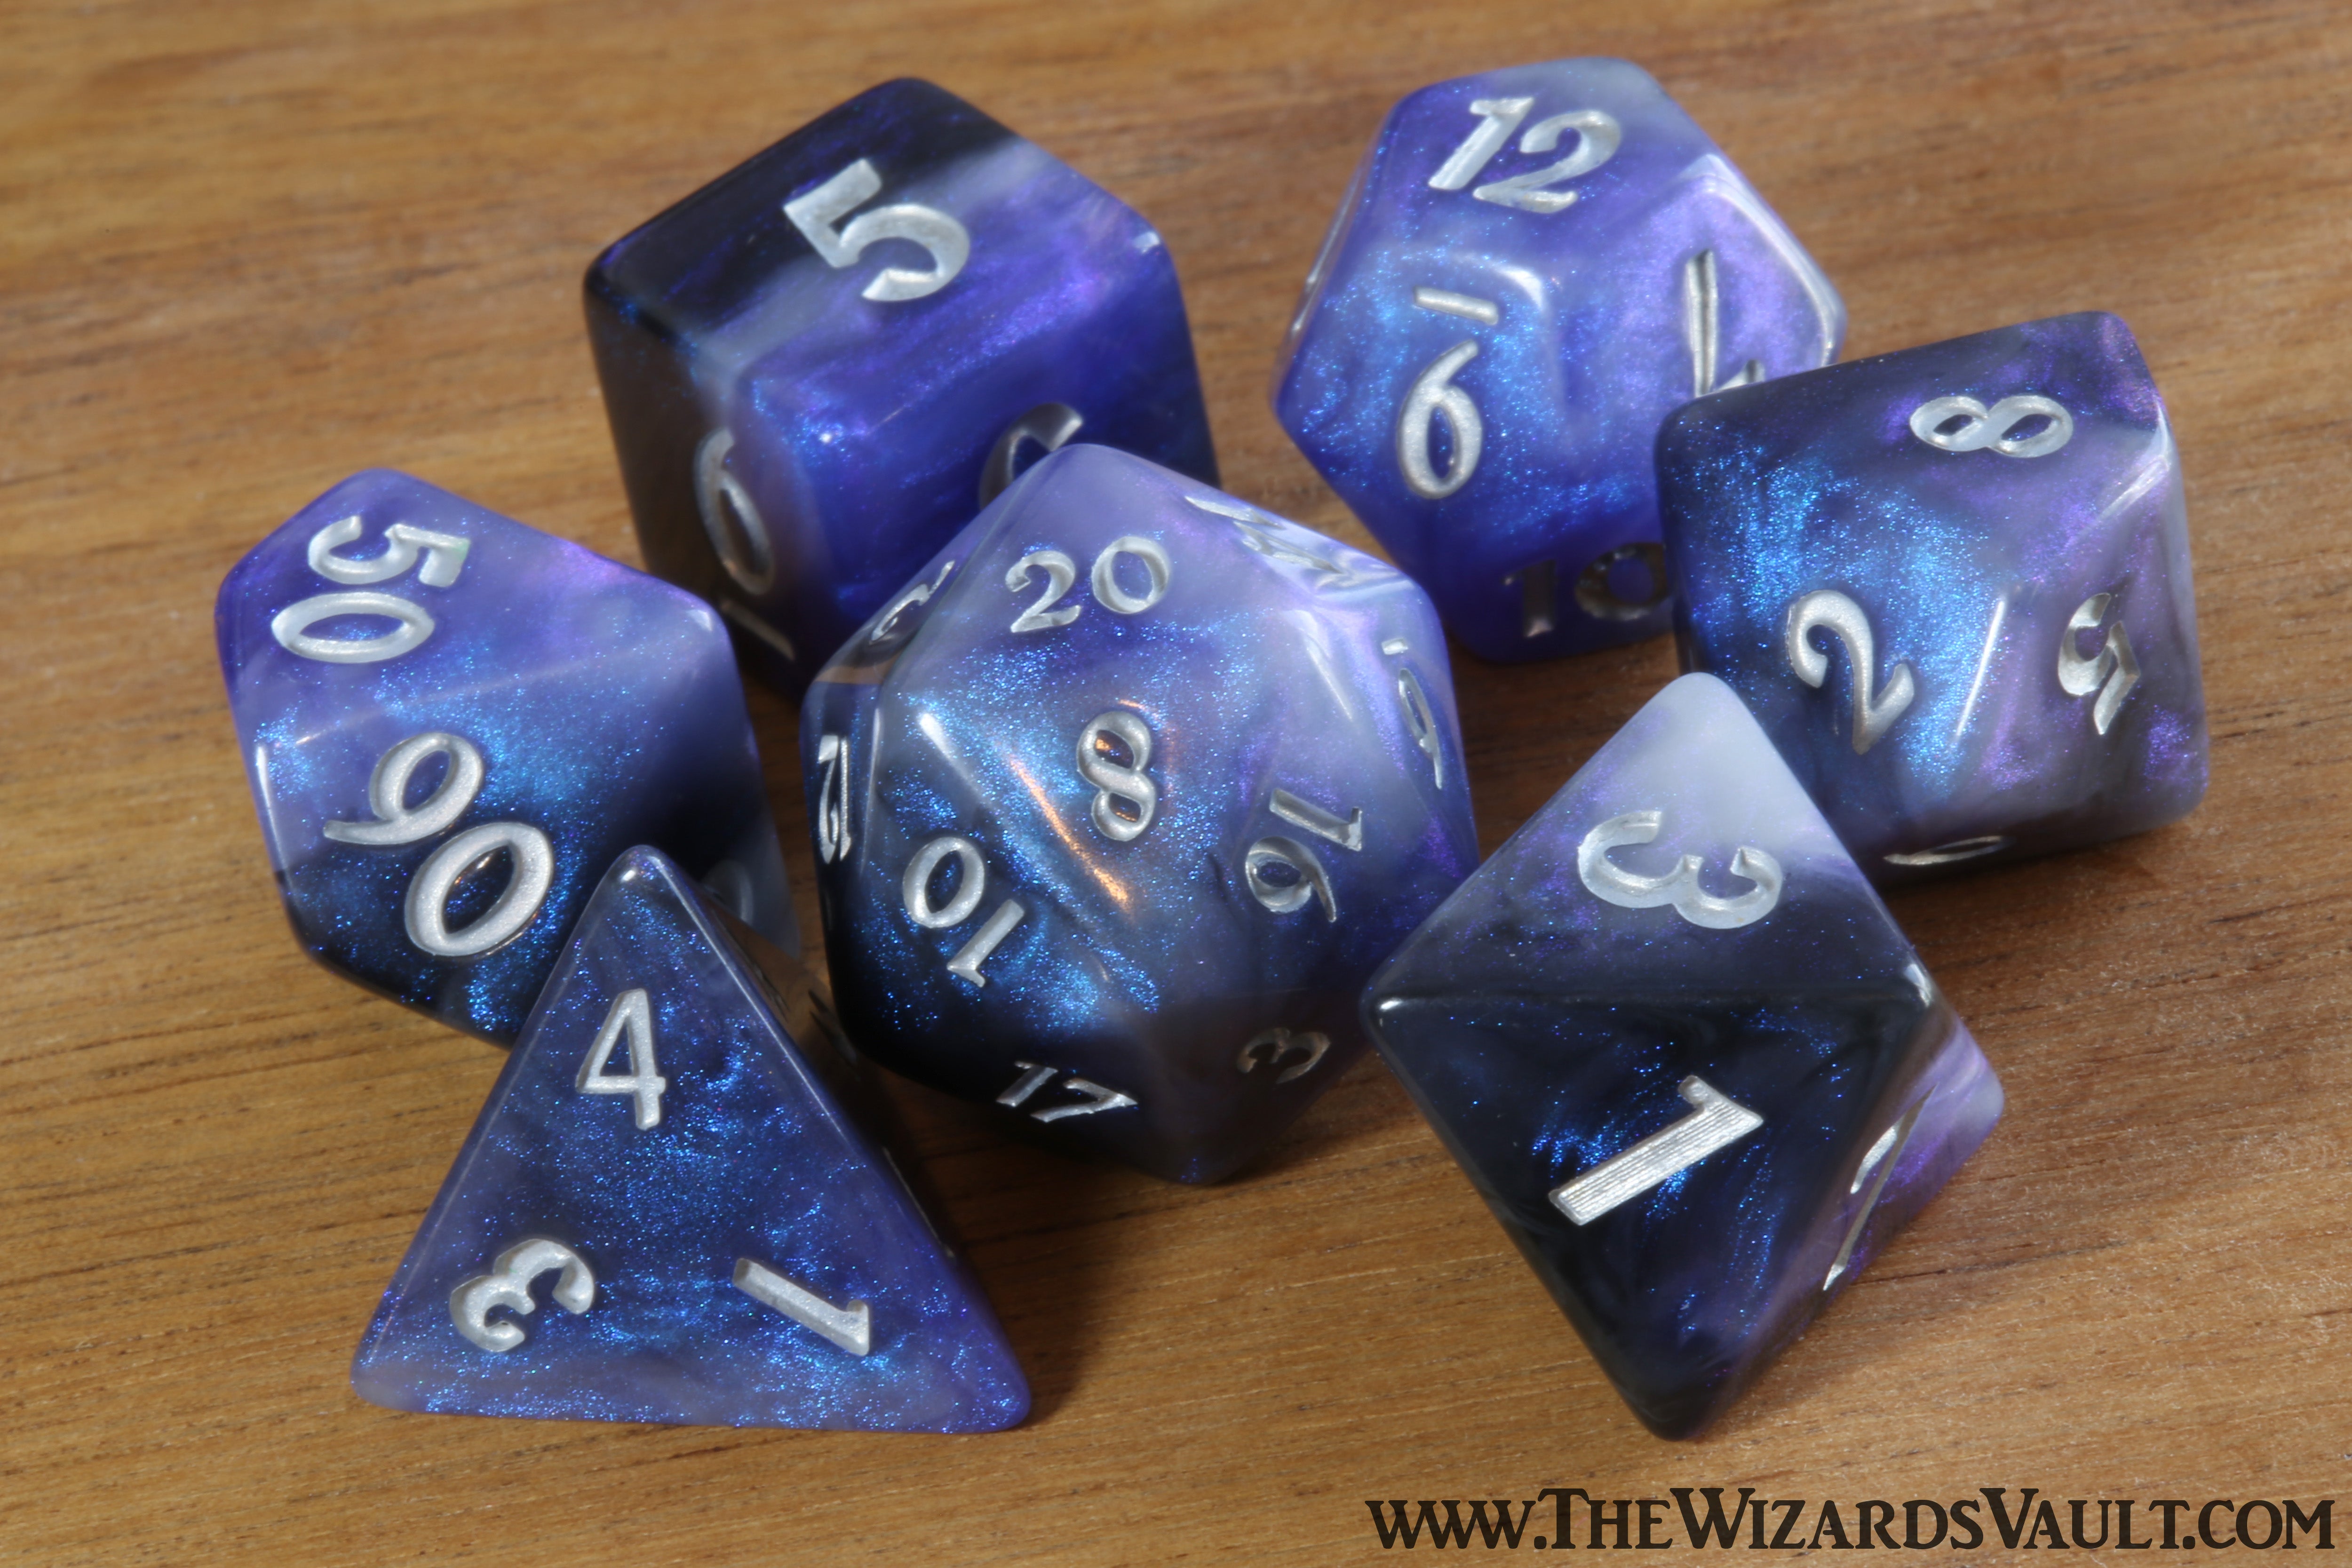 Morpheus Wings - Semi-opaque with iridescent blue and purple glitters - The Wizard's Vault